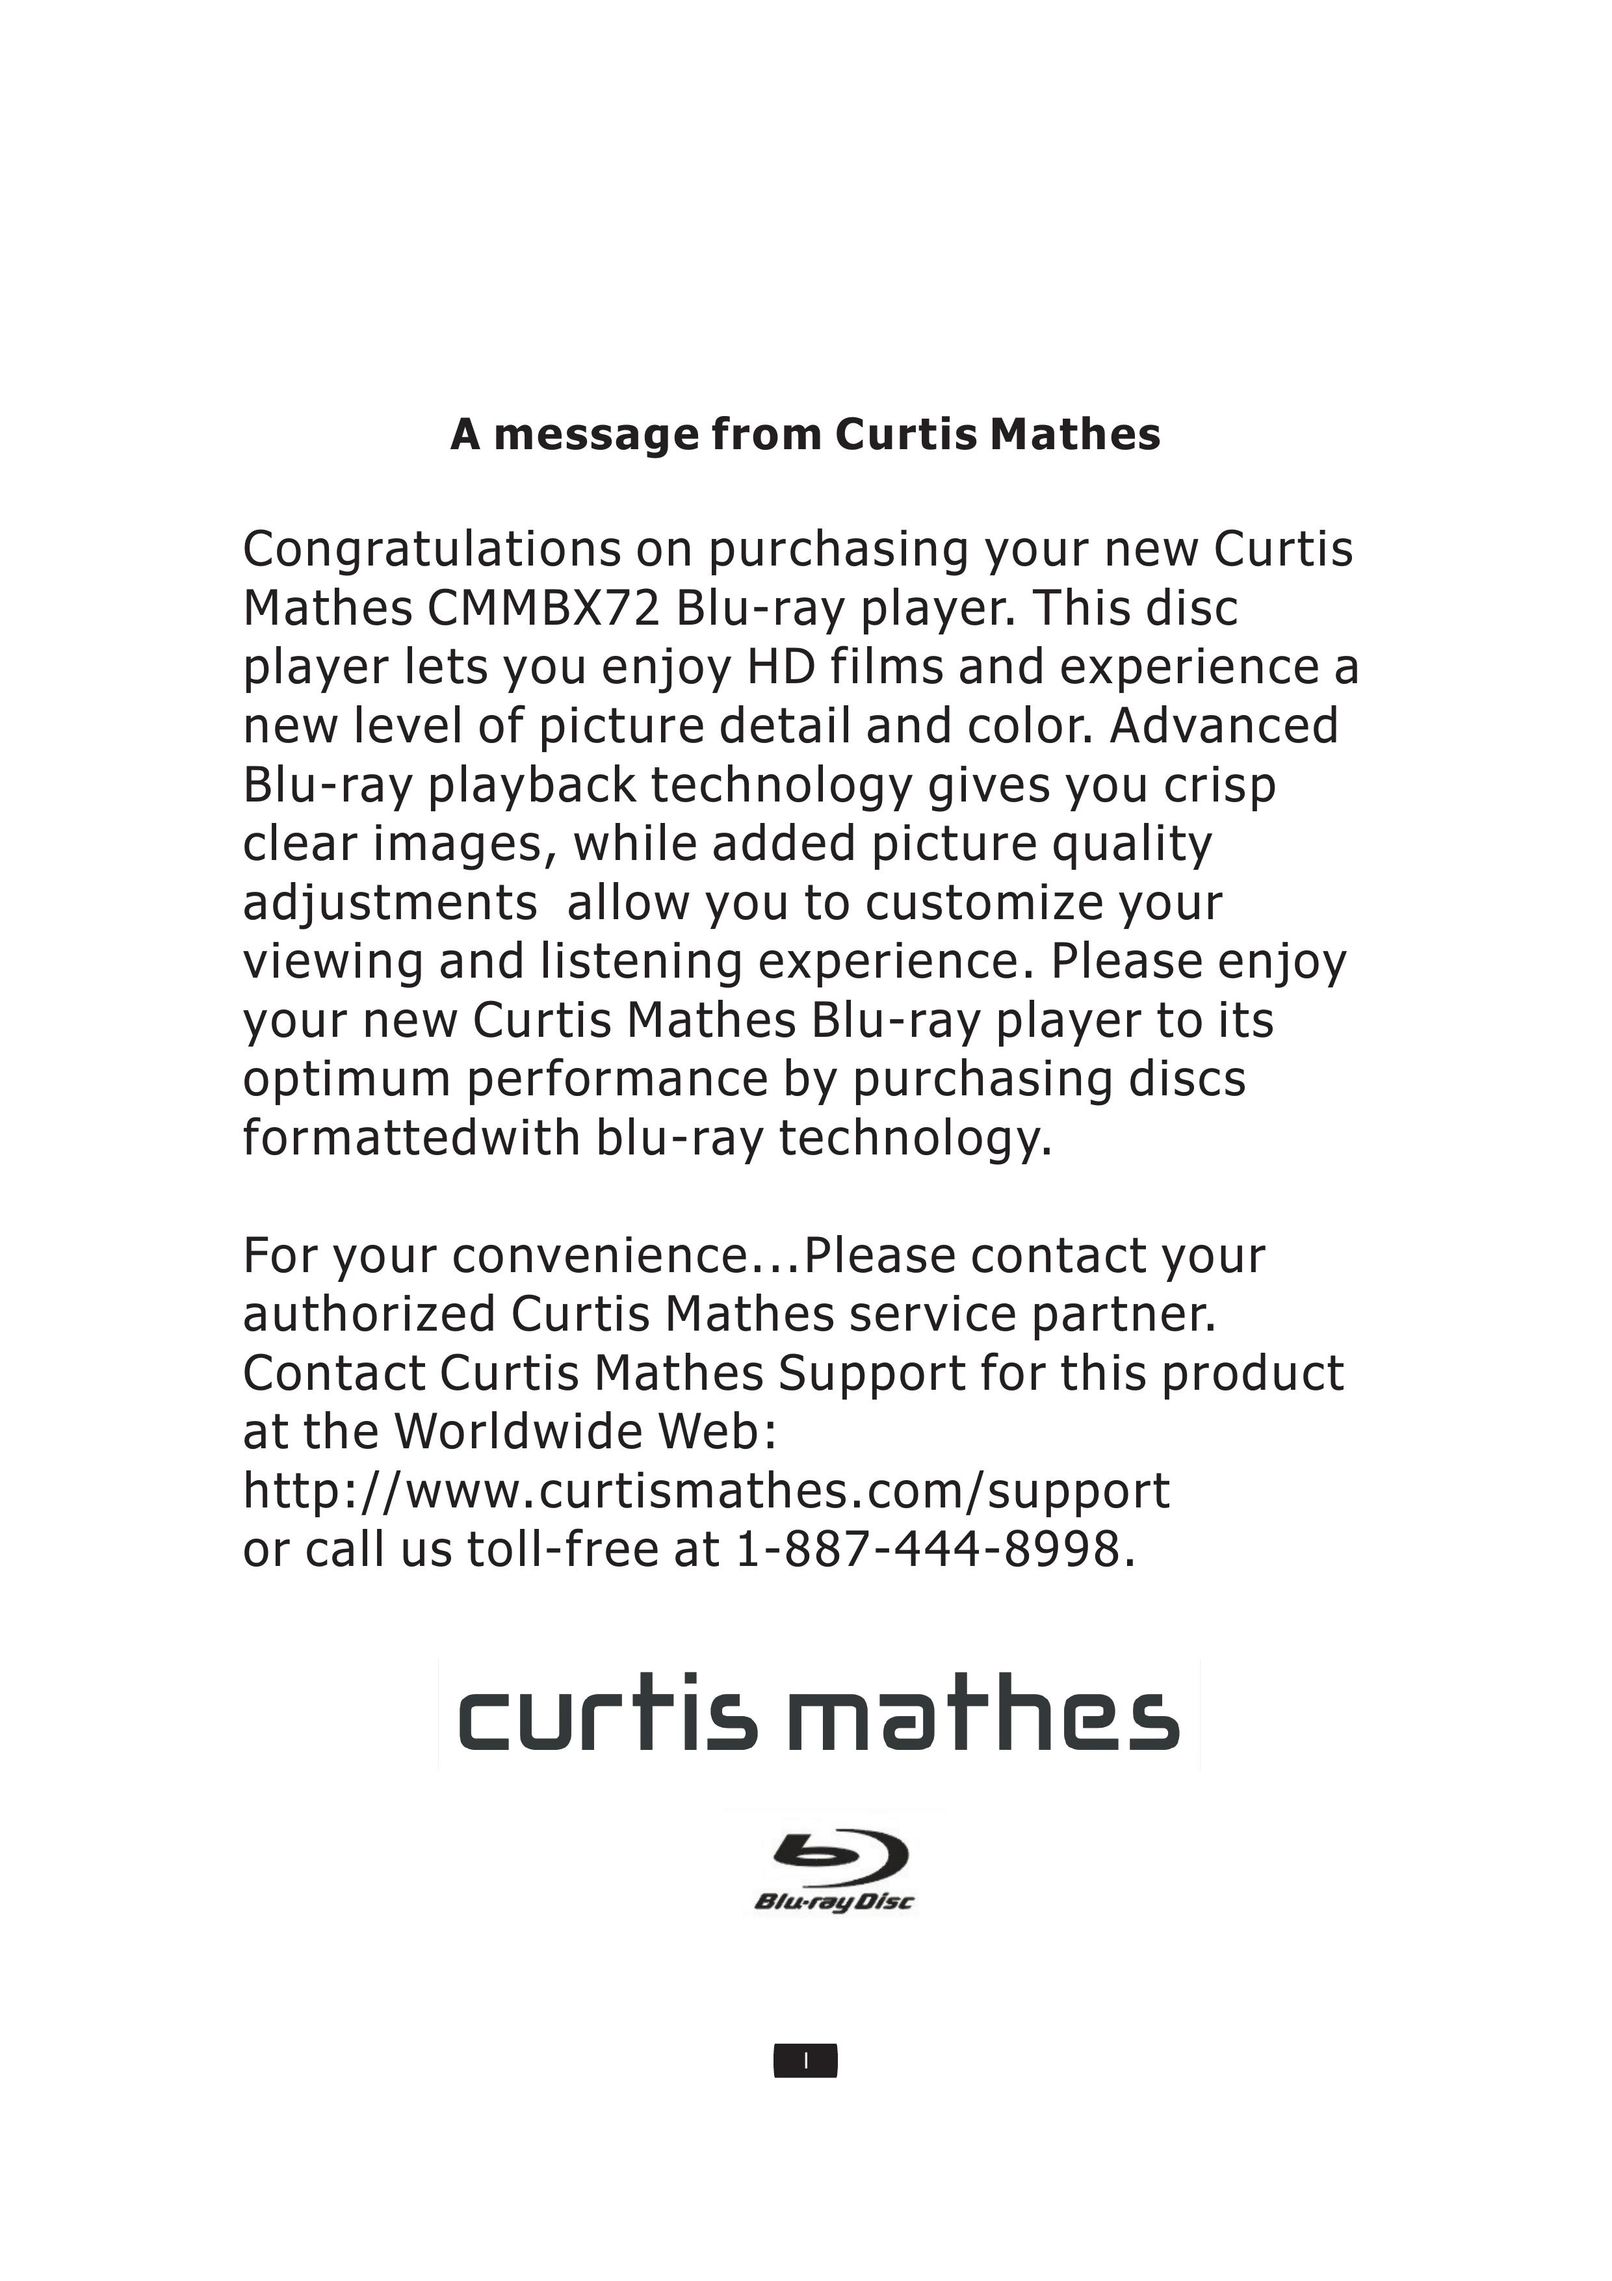 Curtis Mathes CMMBX72 Blu-ray Player User Manual (Page 2)